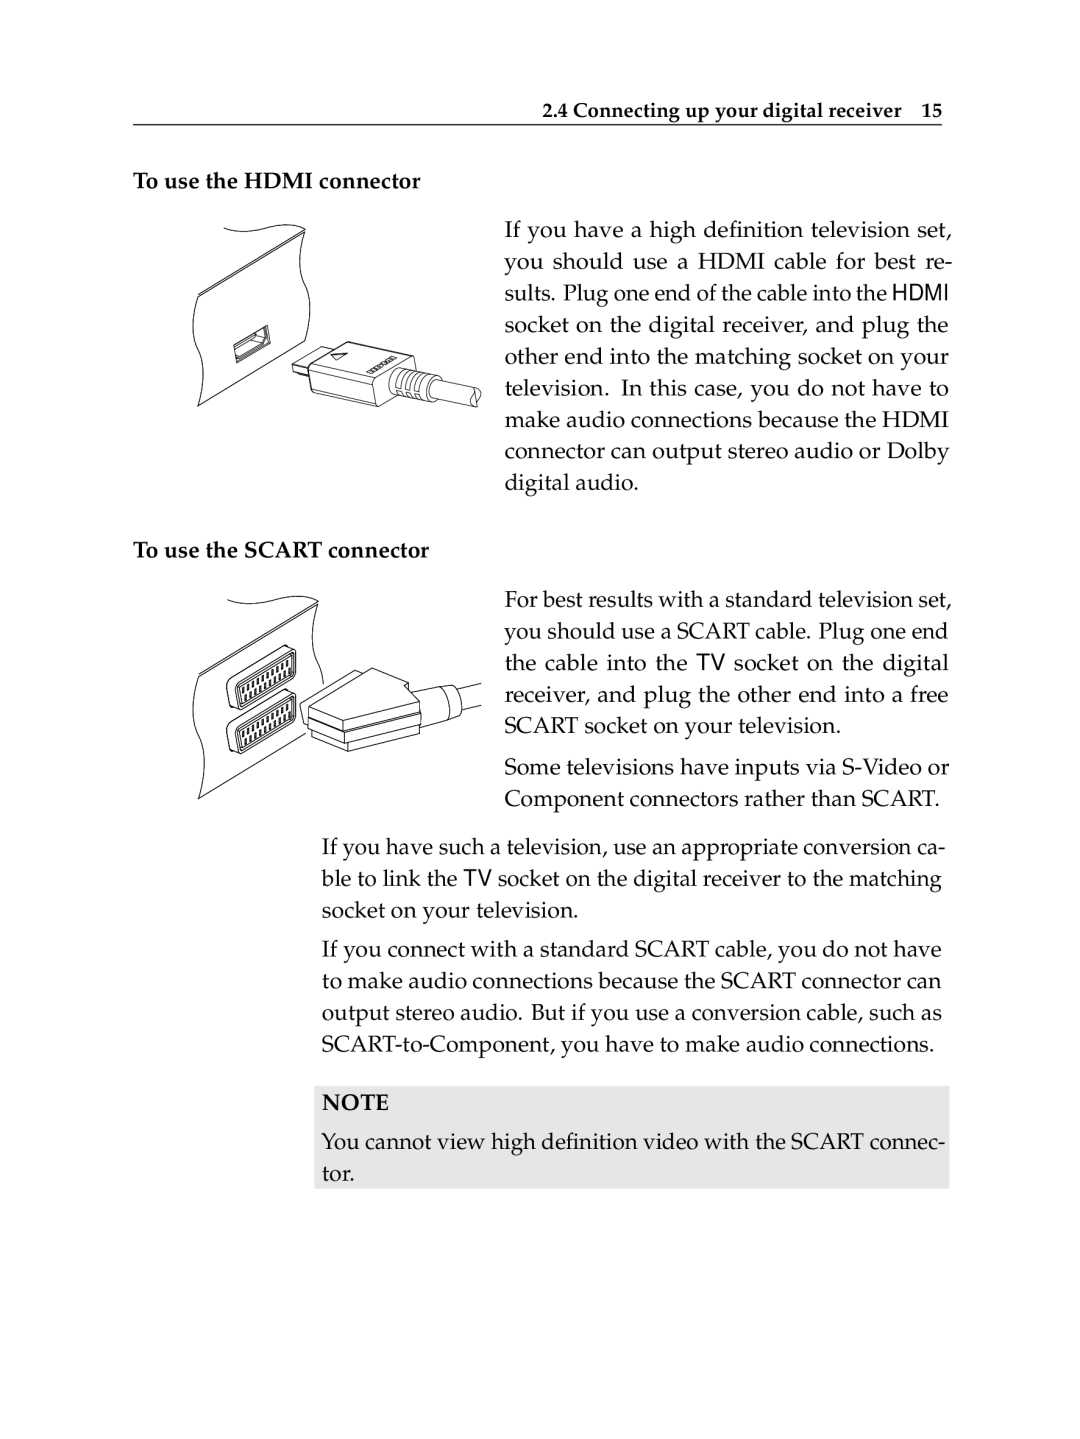 Topfield TF 6000 PVR ES manual To use the HDMI connector, To use the SCART connector 